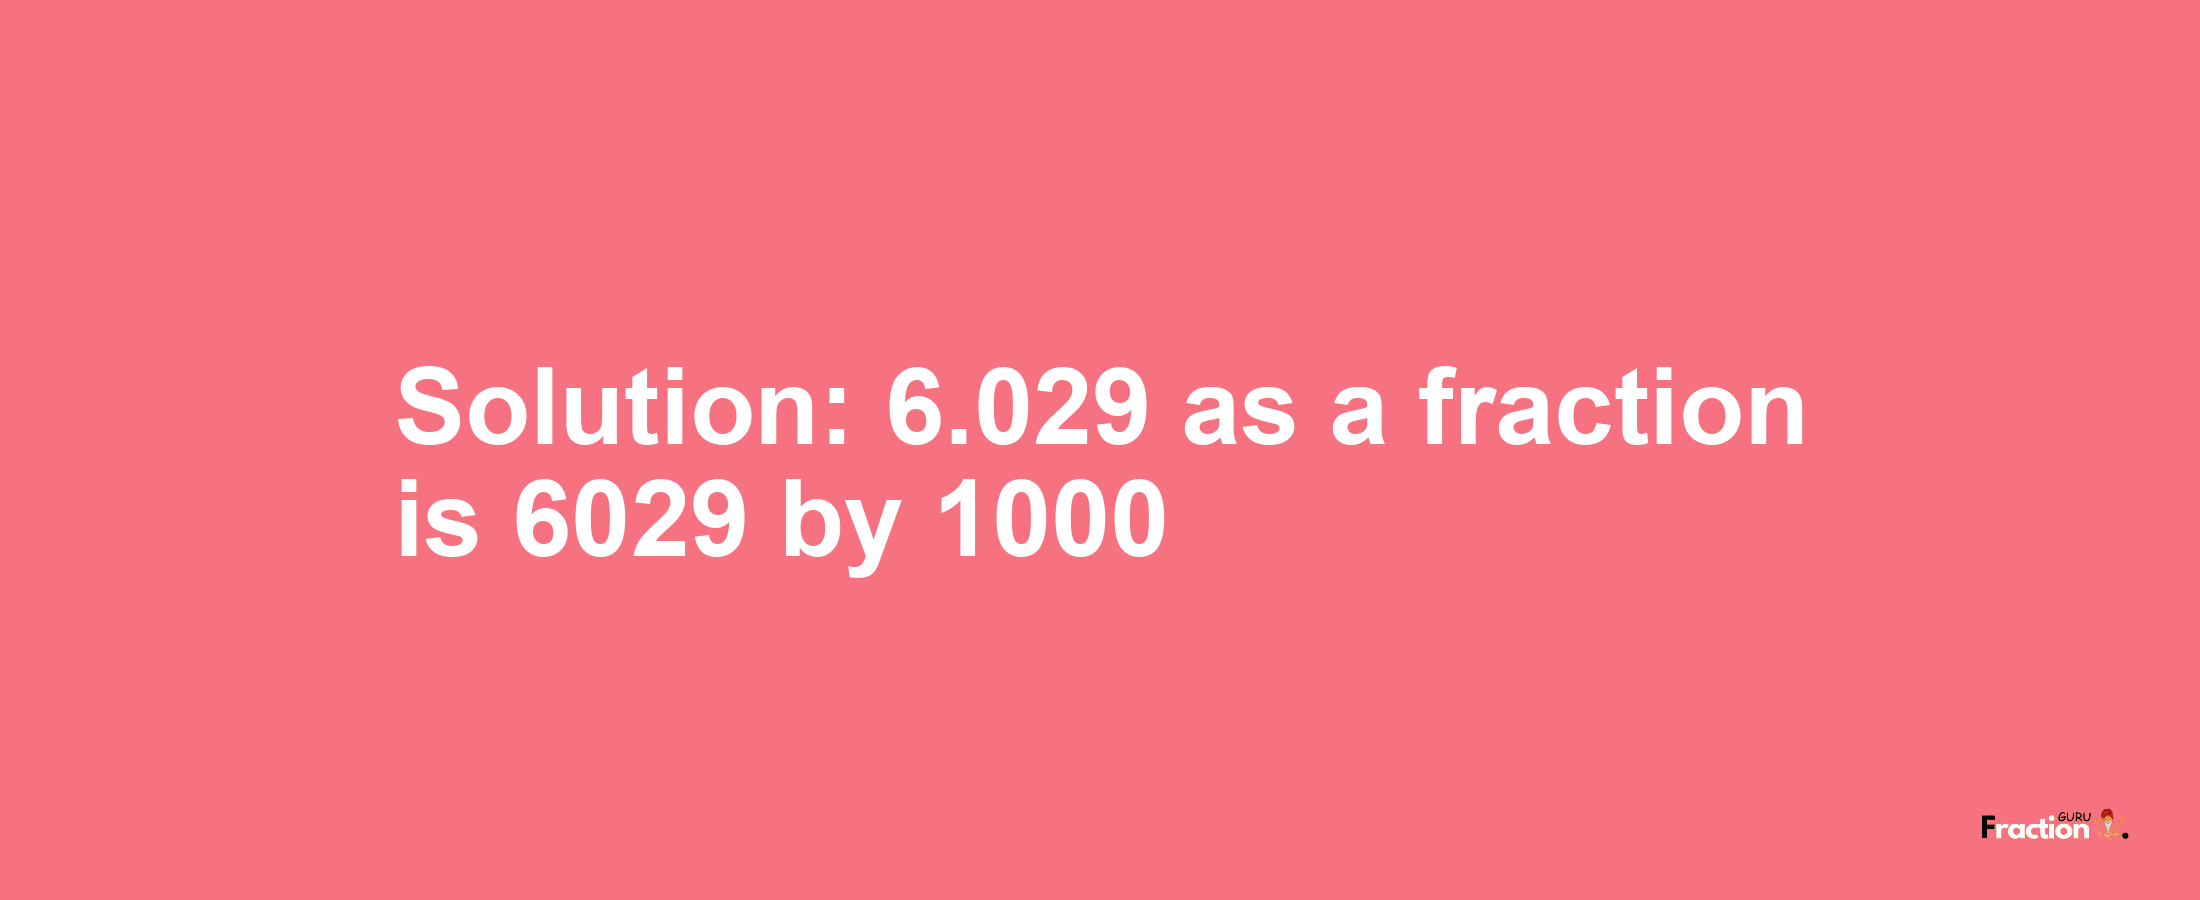 Solution:6.029 as a fraction is 6029/1000